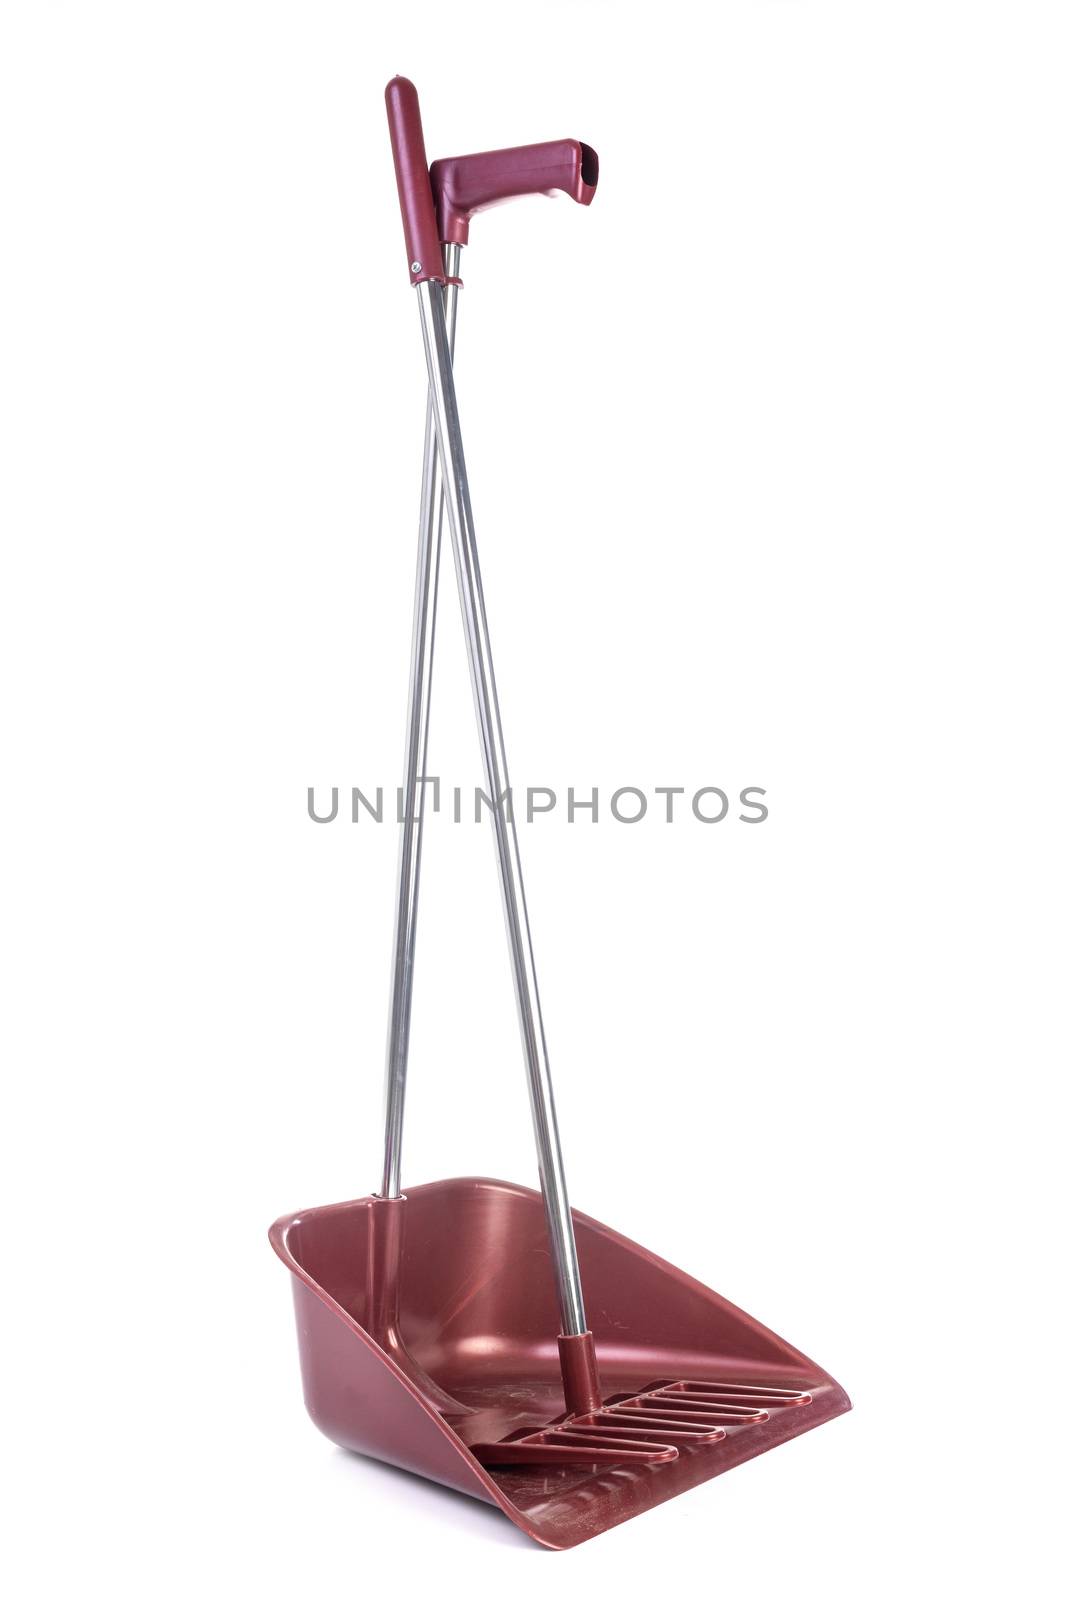 dung shovel in studio by cynoclub